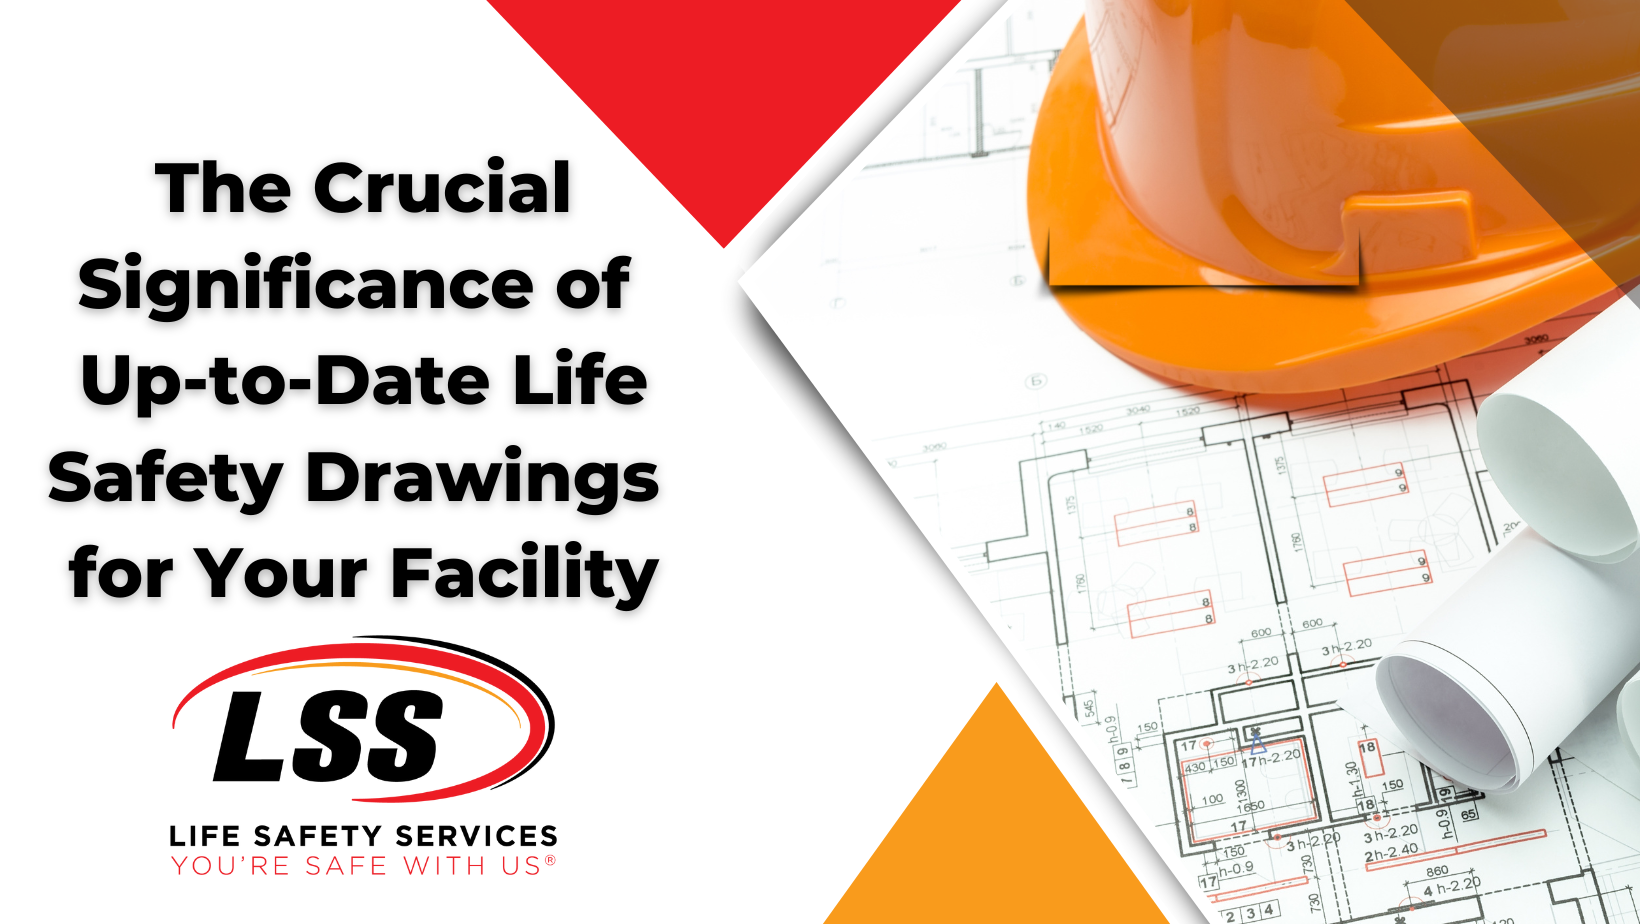 The Crucial Significance of Up-to-Date Life Safety Drawings for Your Facility